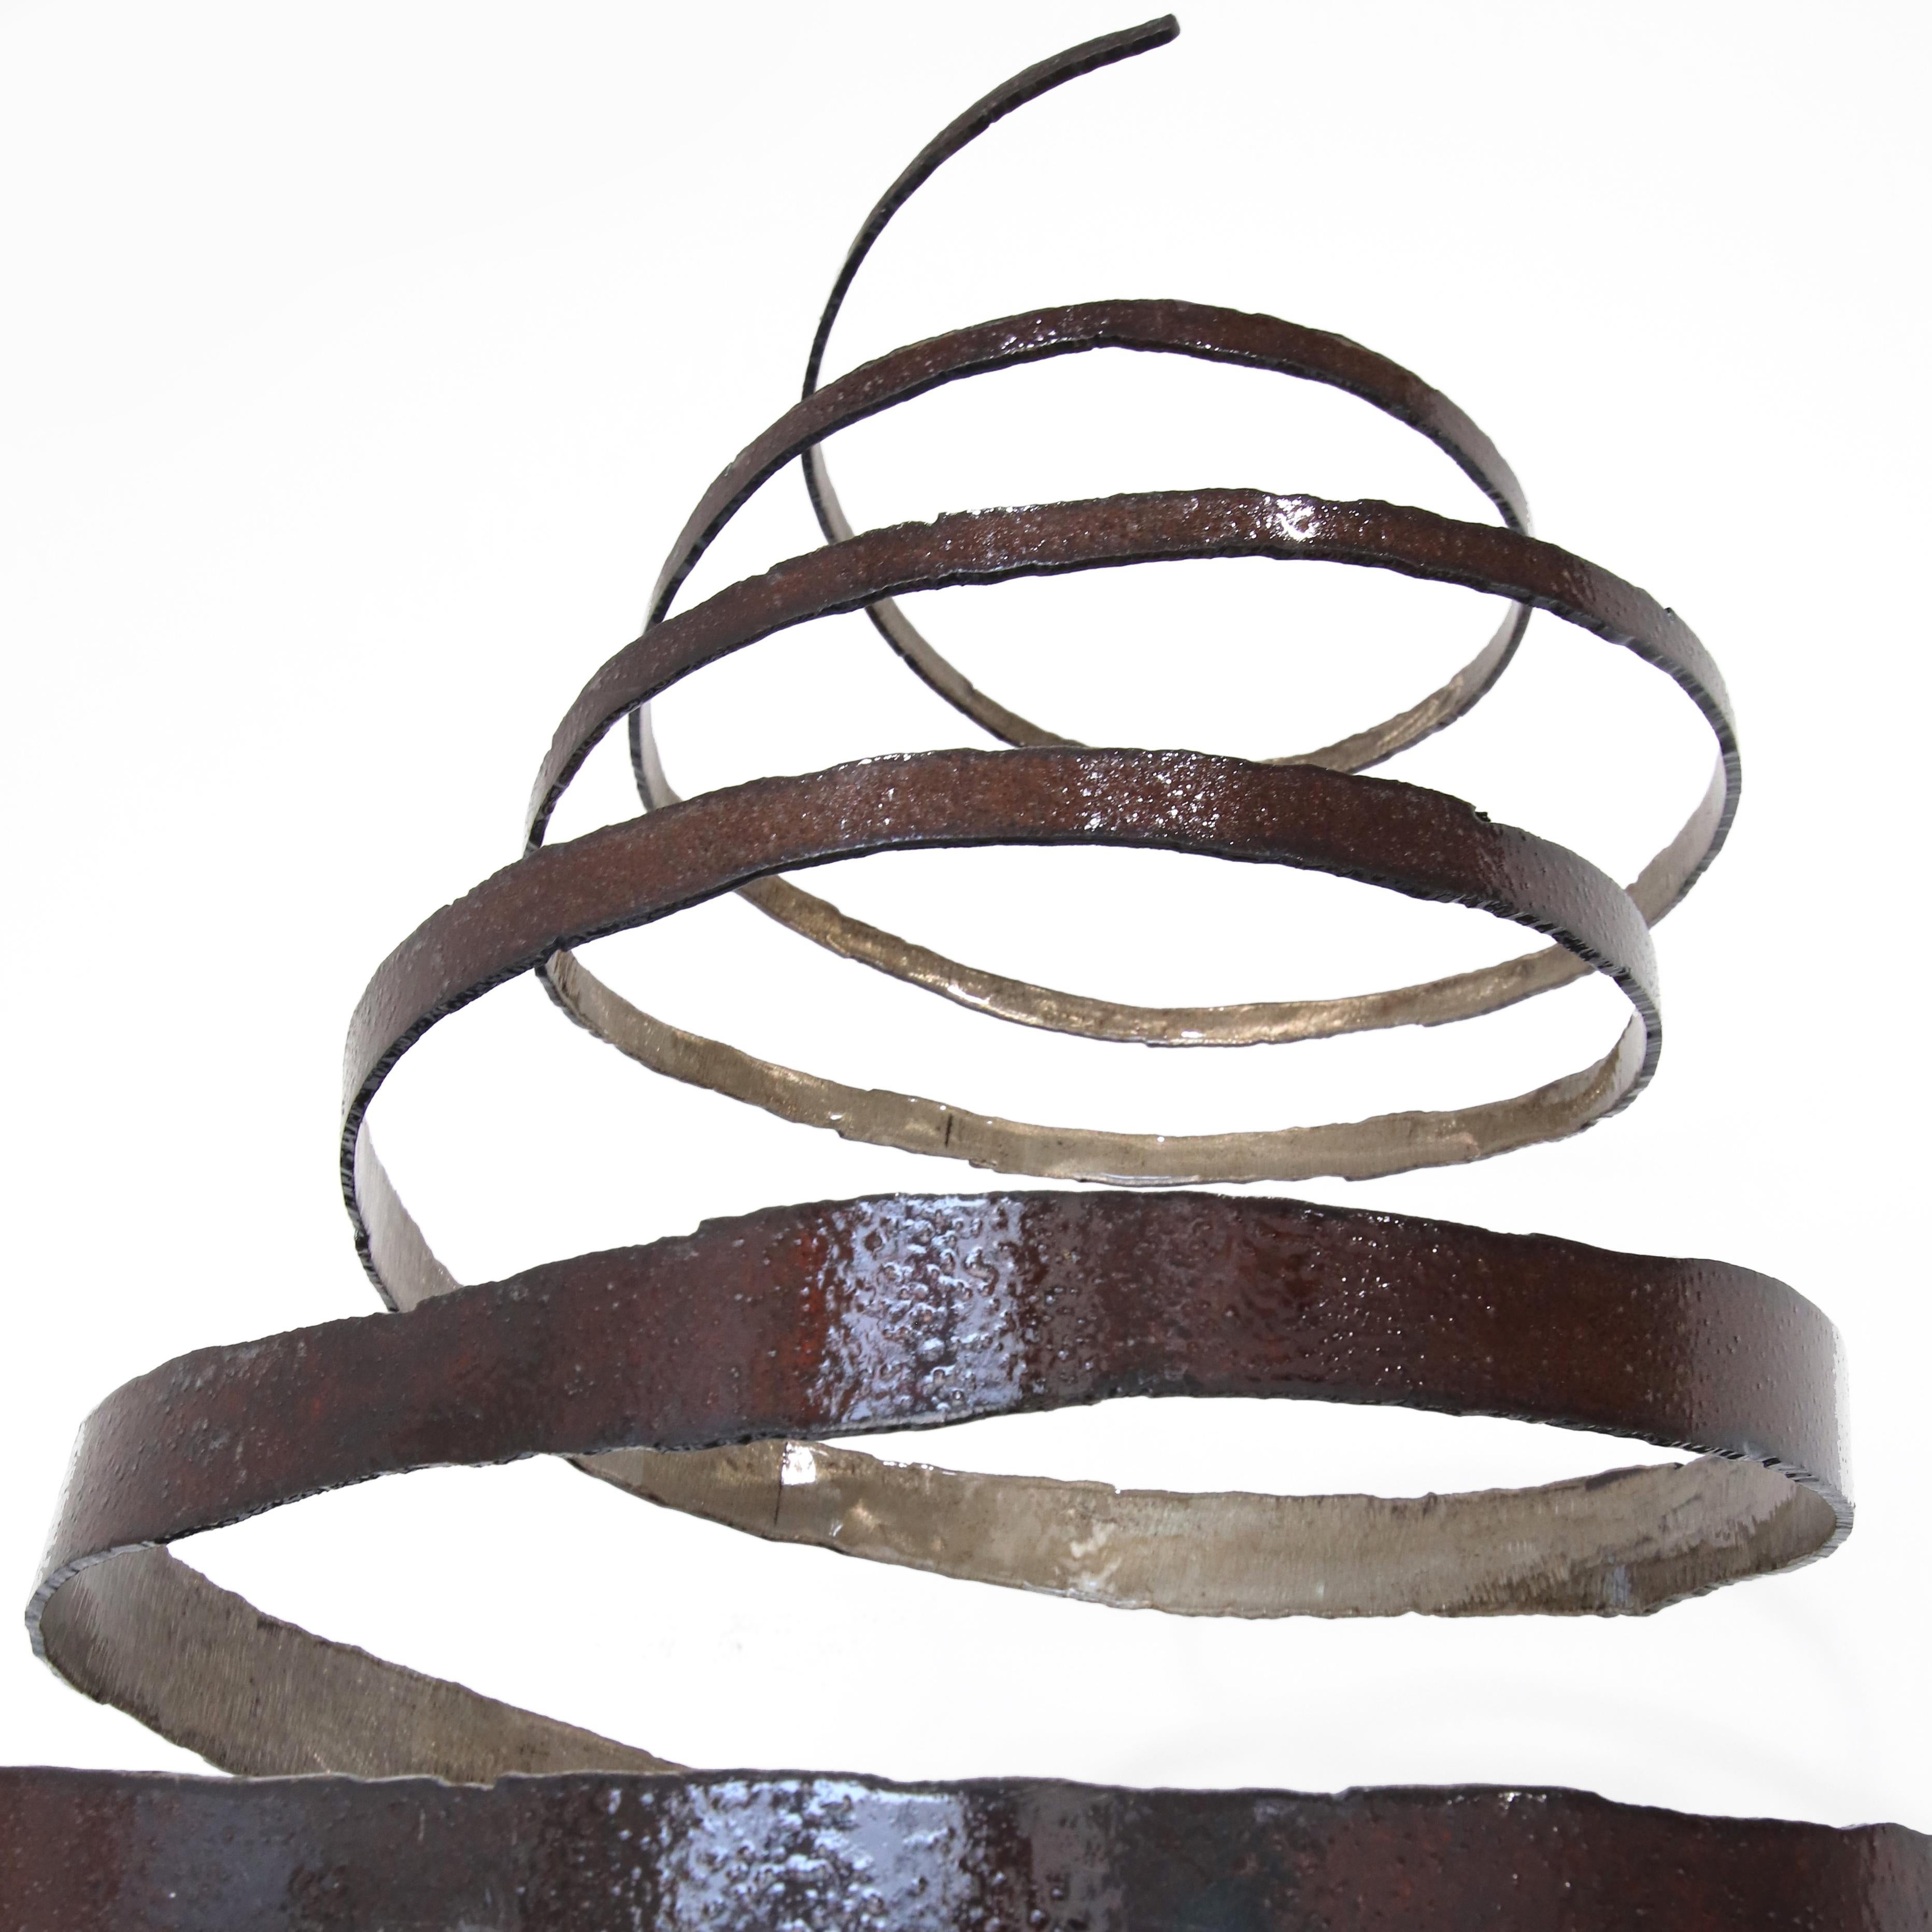 Focusing on making human-scale, abstract, minimalist, and often kinetic sculptures, D'Arcy Bellamy creates art exclusively from steel pipe. Bellamy’s work is characterized by flowing lines, strong negative space, originality, movement, and shadows.